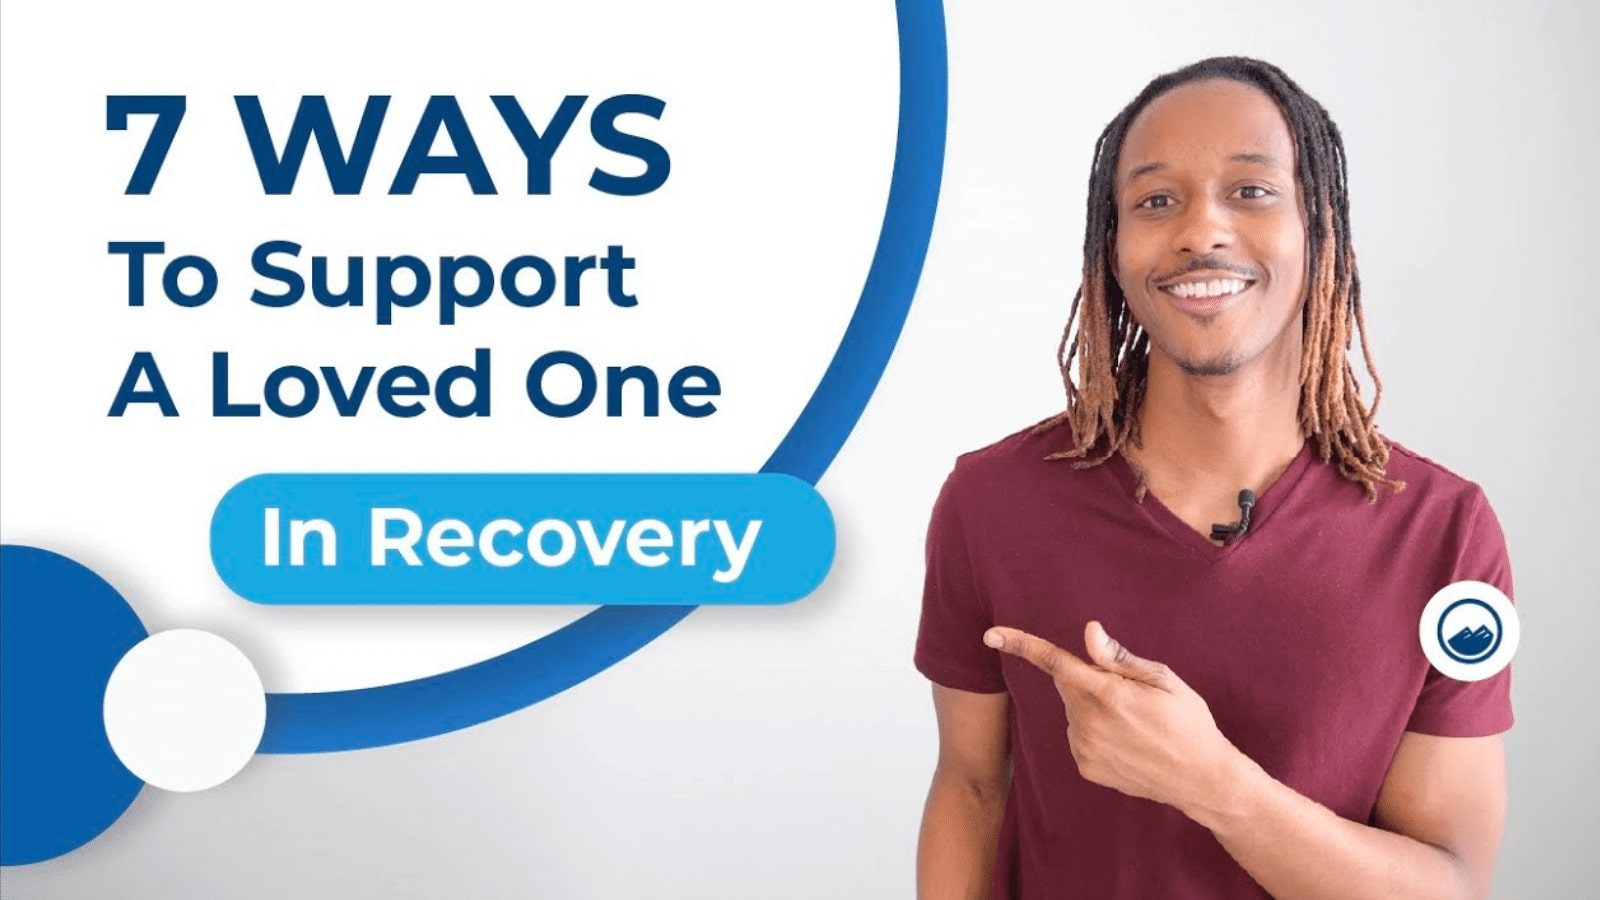 7 Ways to support a loved one in recovery with a photo of Immanuel Jones